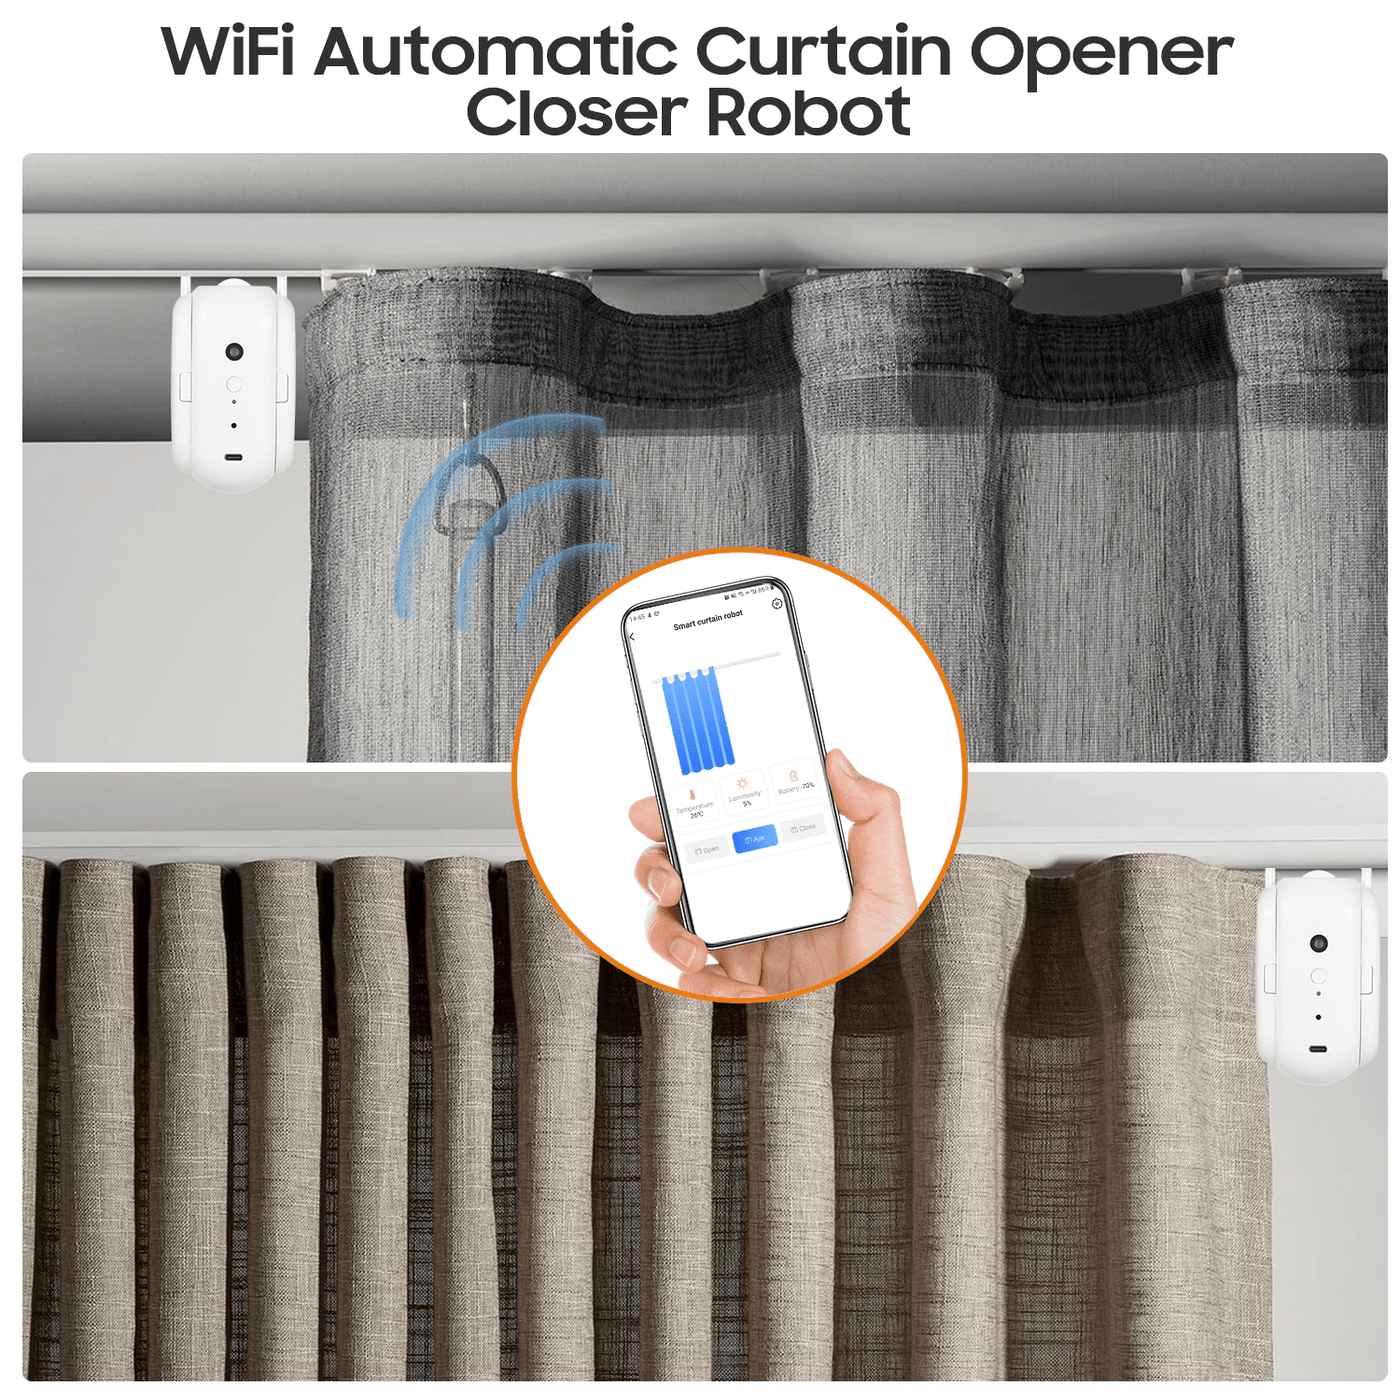 Automatic Curtain Opener - Smart Curtain Opener Robot